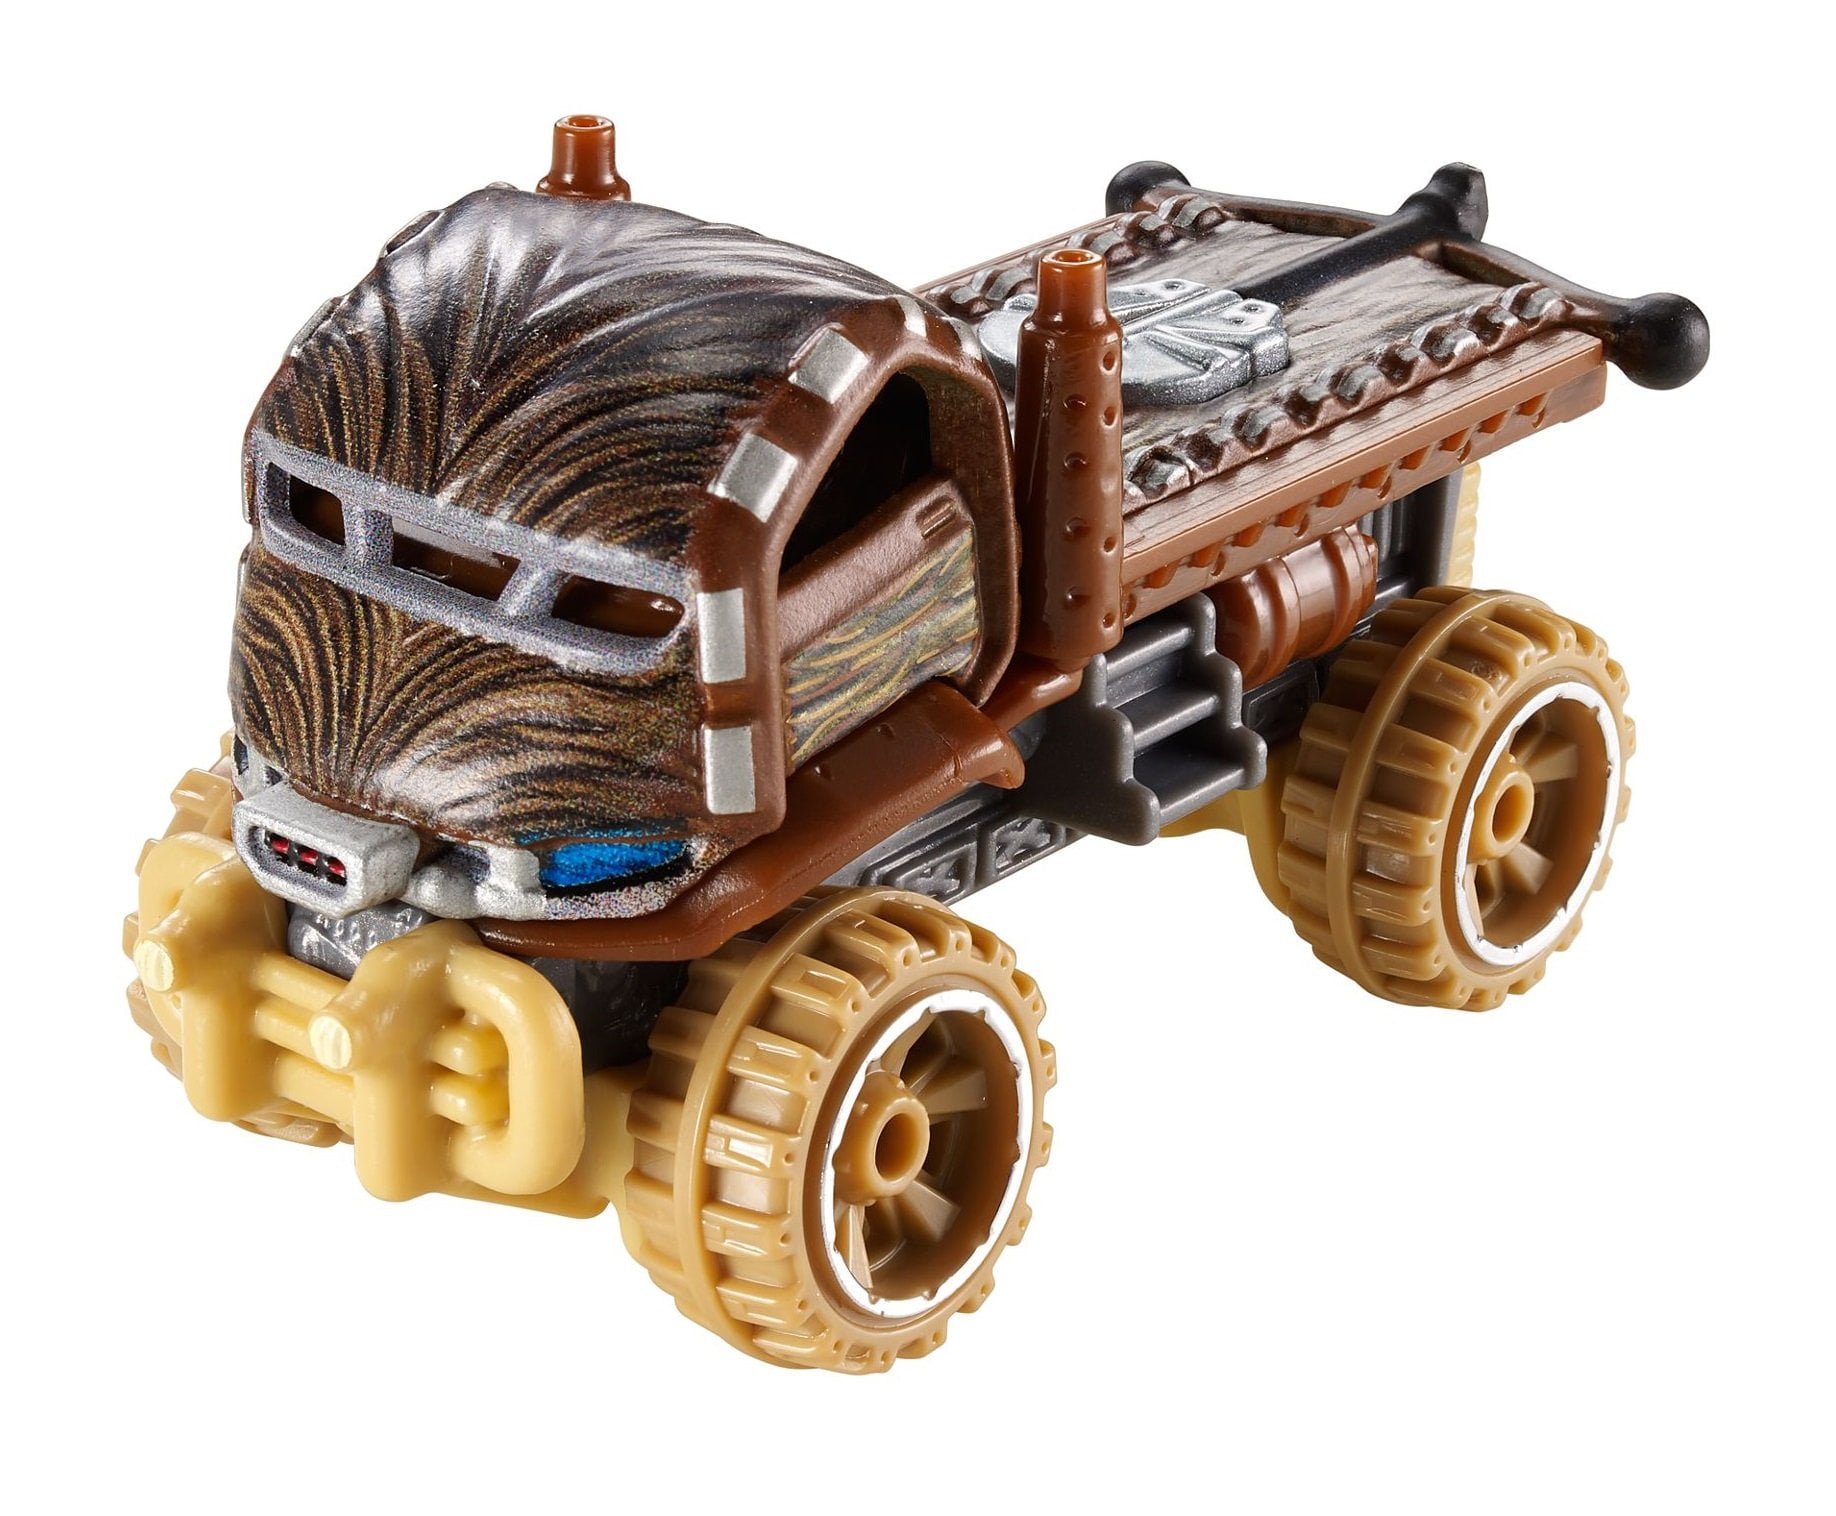 HE6 2019 Hot Wheels Character Cars STAR WARS Chewbacca w/ Action Bowcaster